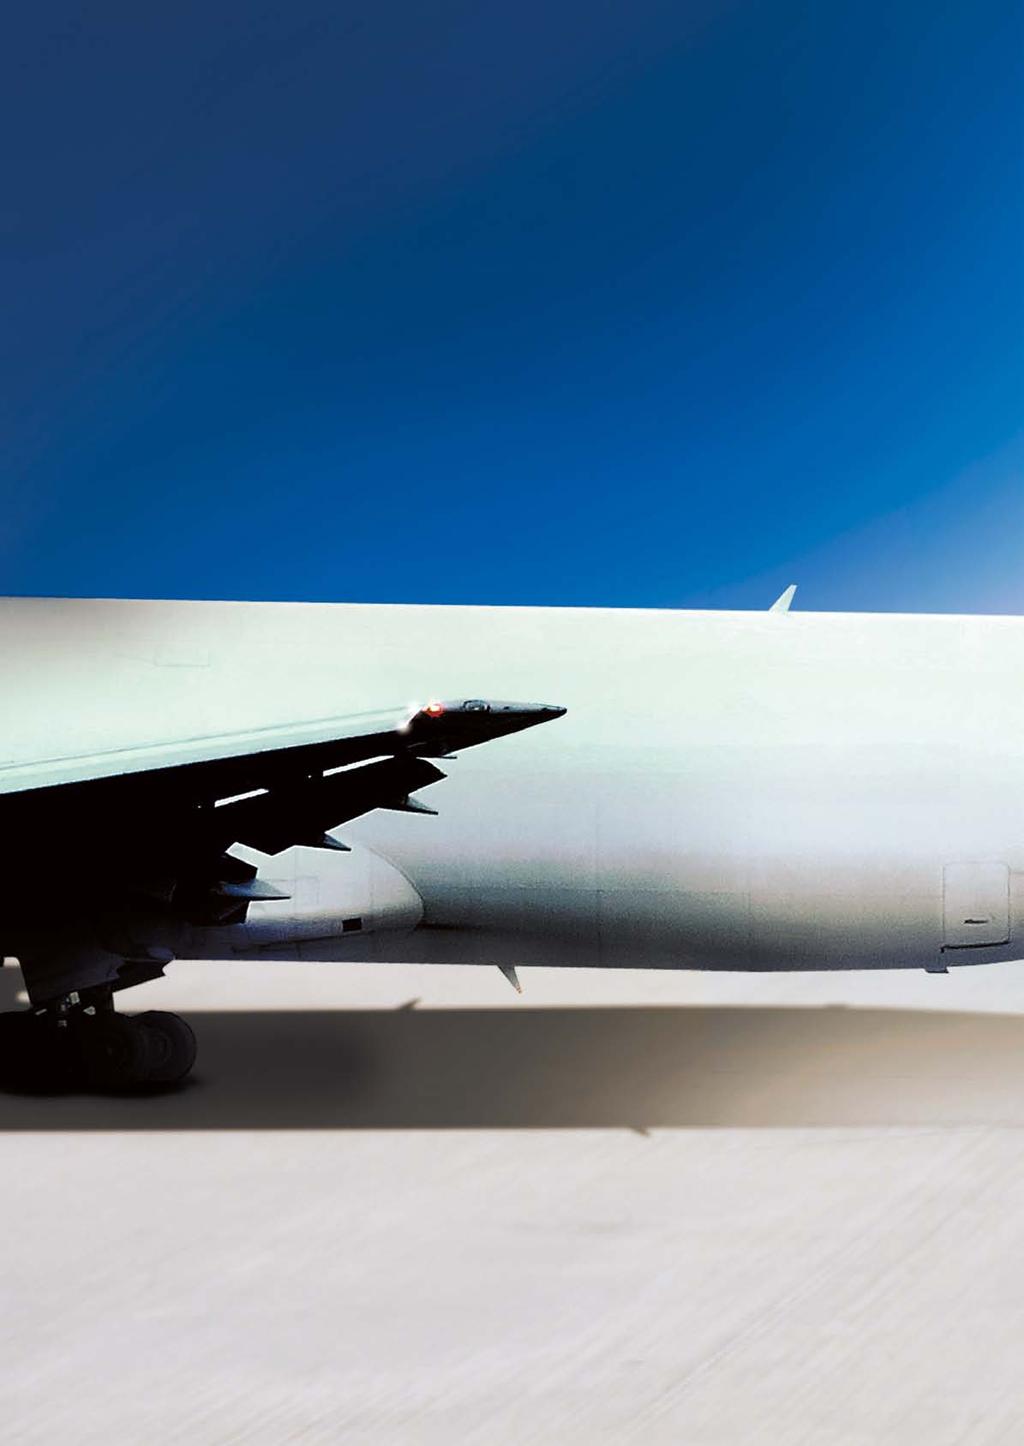 Bringing innovation to air cargo. We deliver a new future to customers worldwide. ANA Cargo continually strives to bring new value and innovation to the world of international logistics.